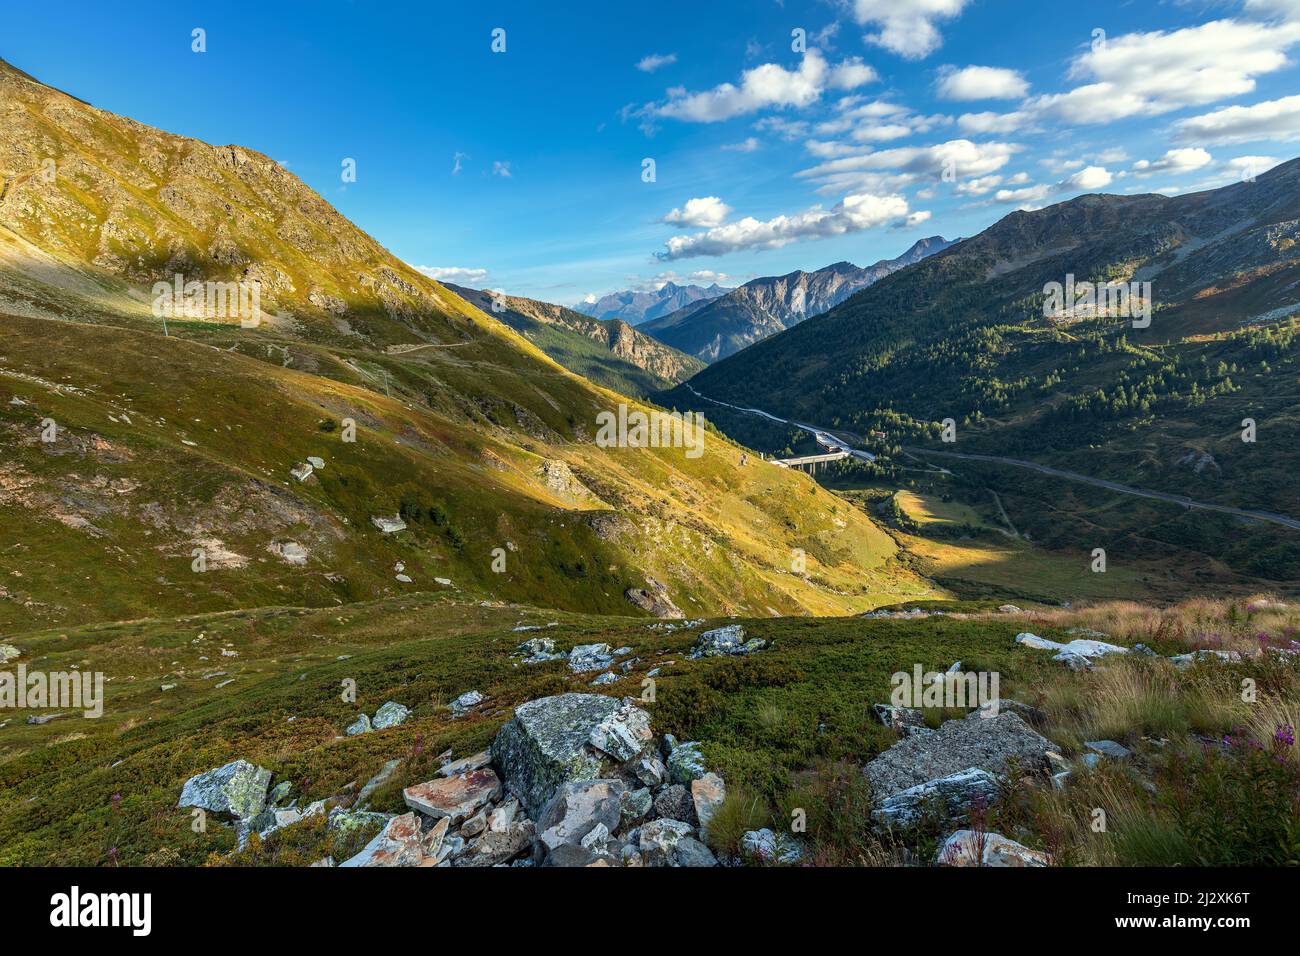 View of green mountains under blue sky near Great St Bernard Pass in Aosta Valley, Northern Italy. Stock Photo